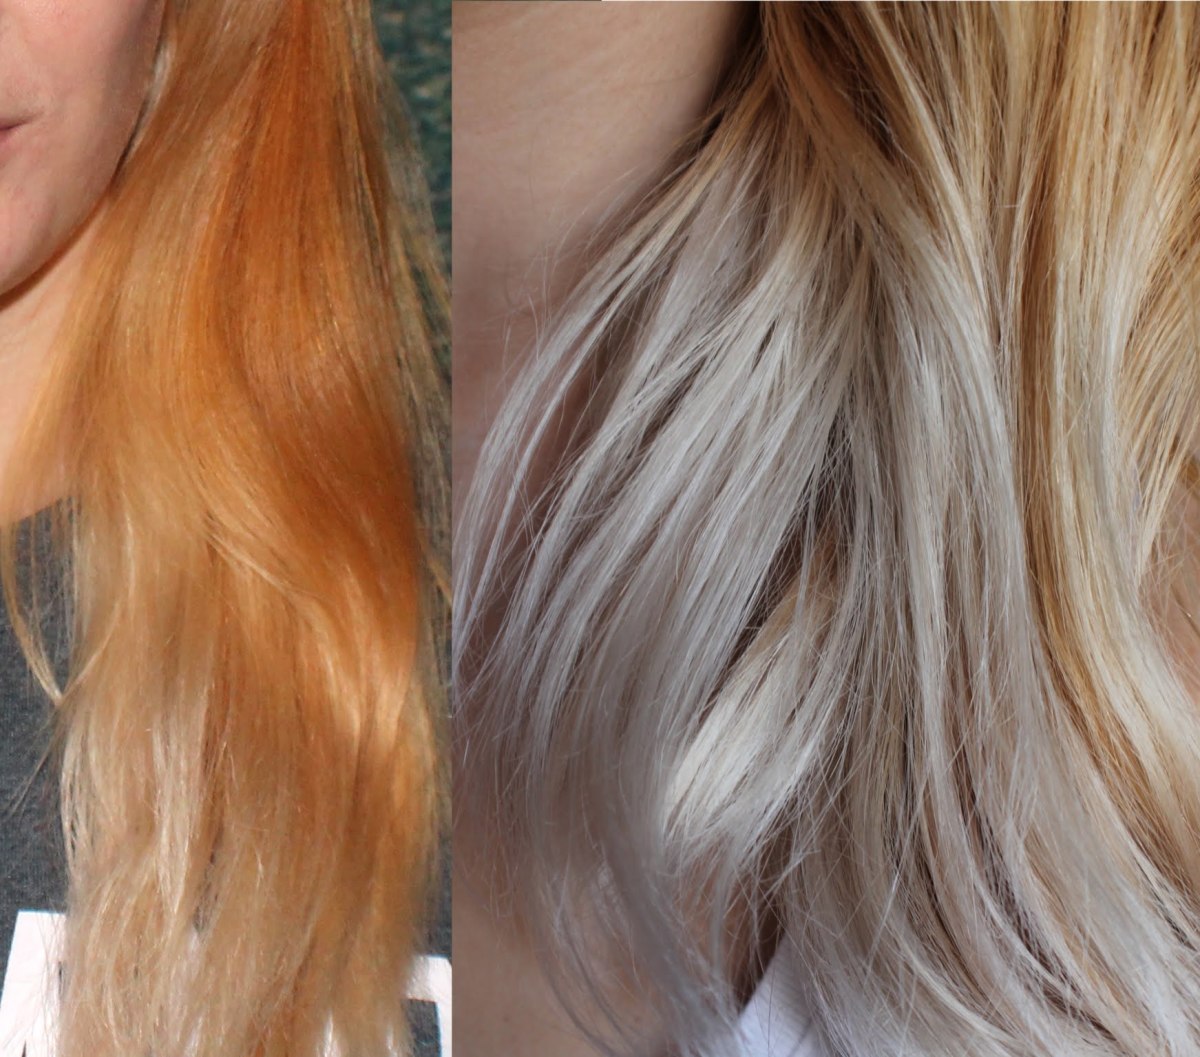 DIY Hair: How to Use Wella Color Charm Toner | Bellatory